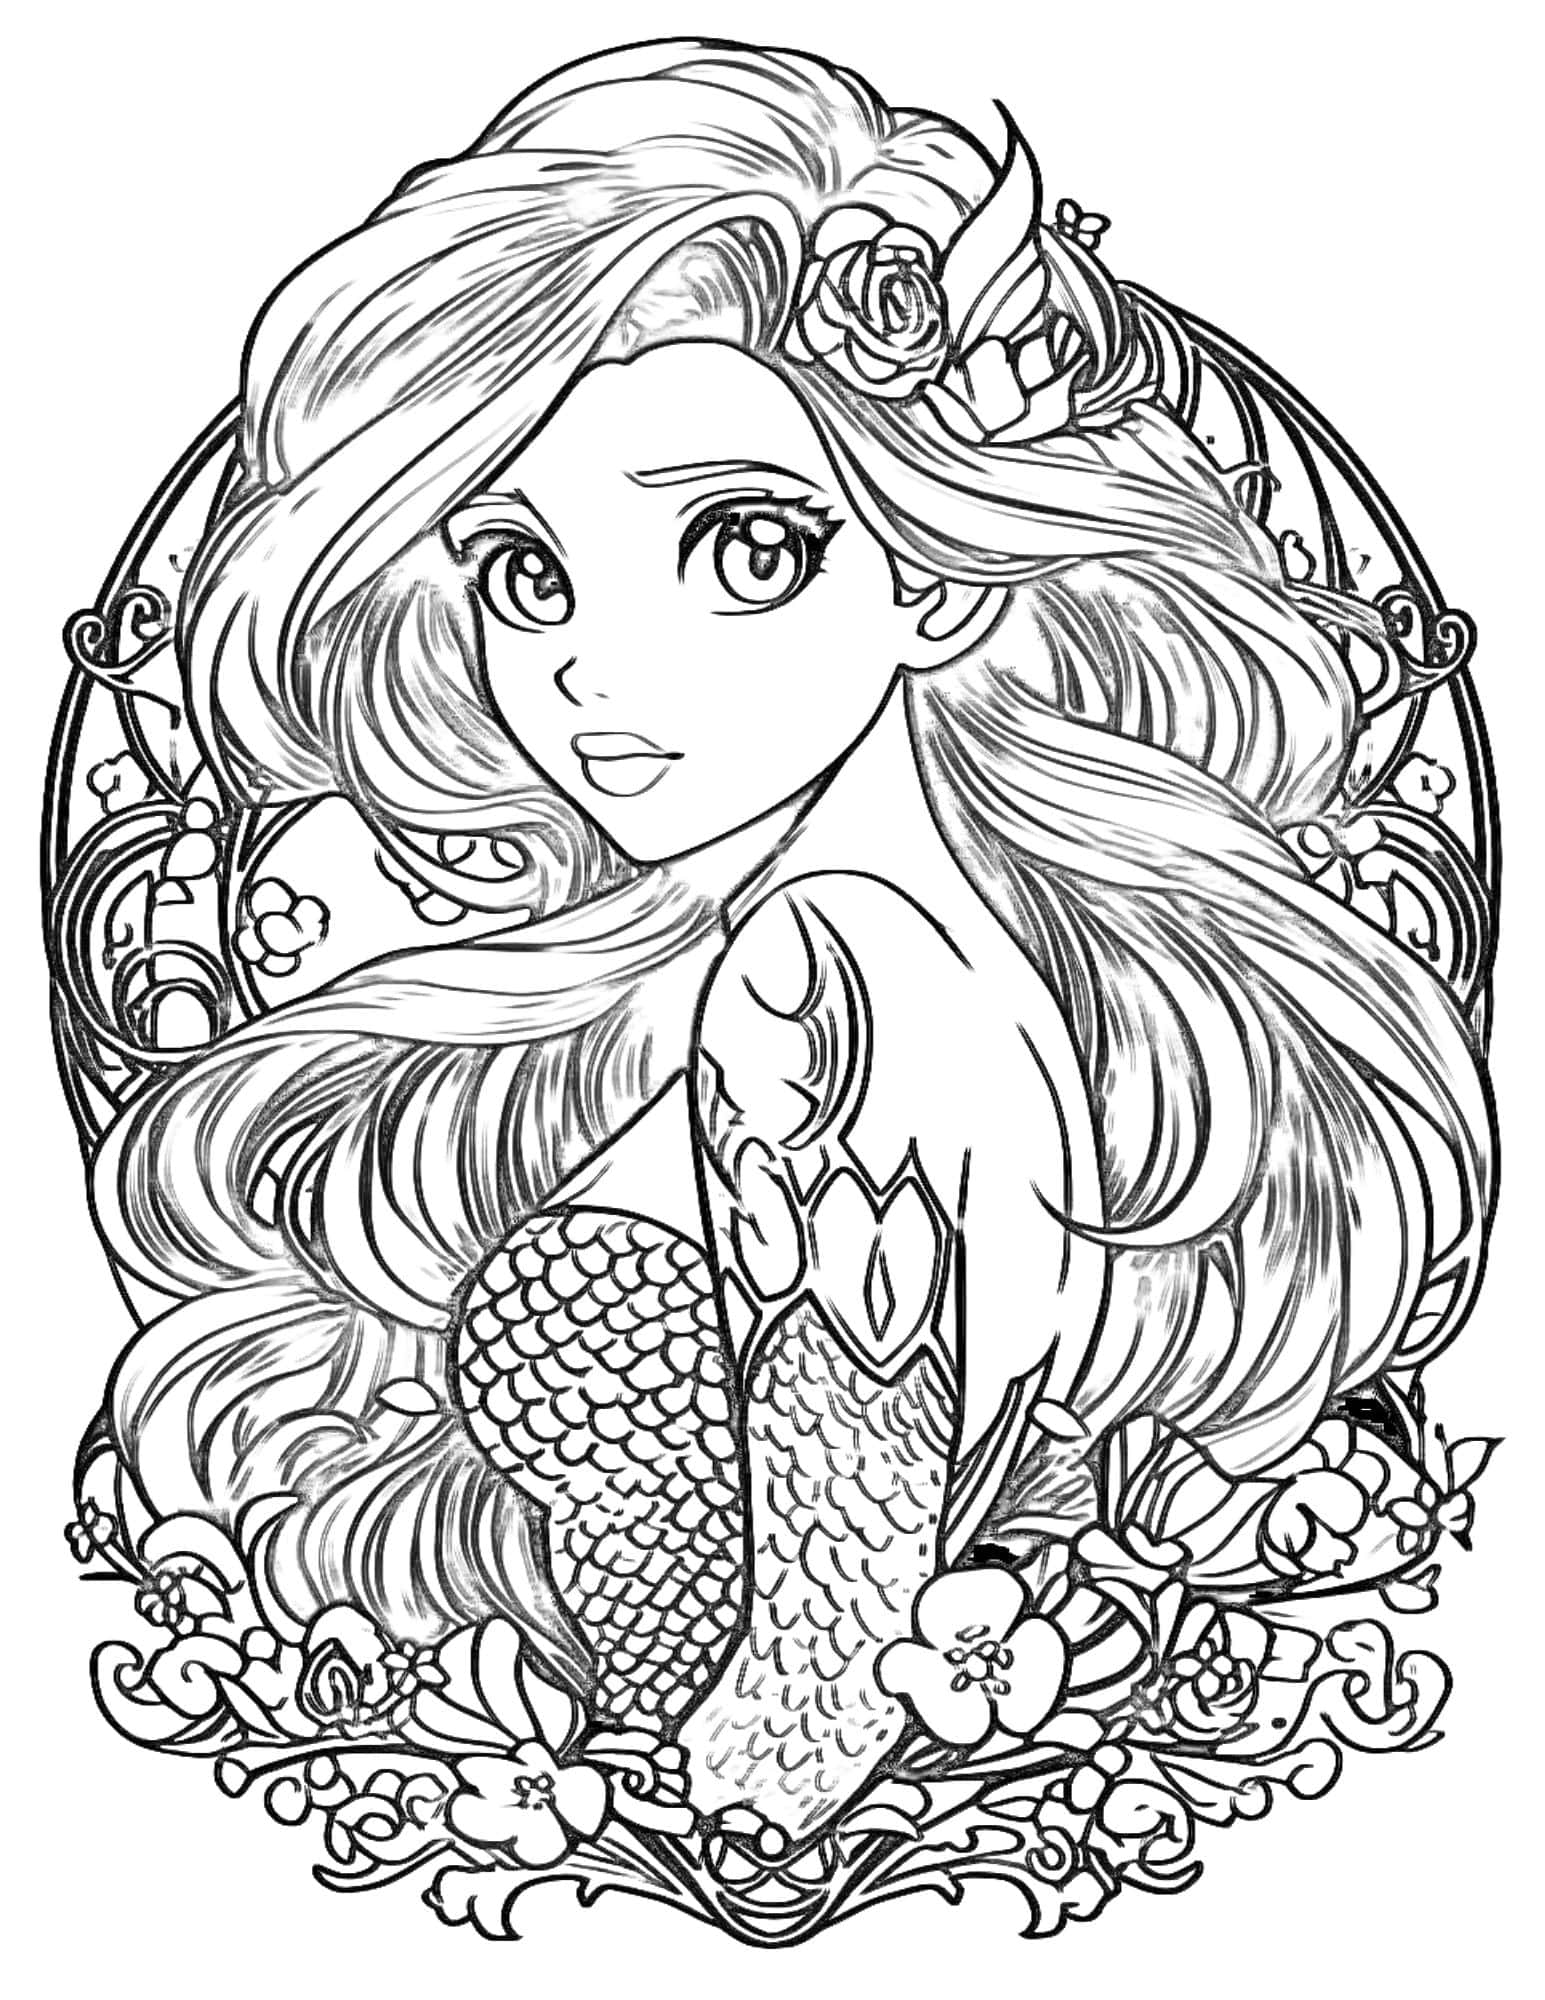 Mermaid coloring pages for kids and adults